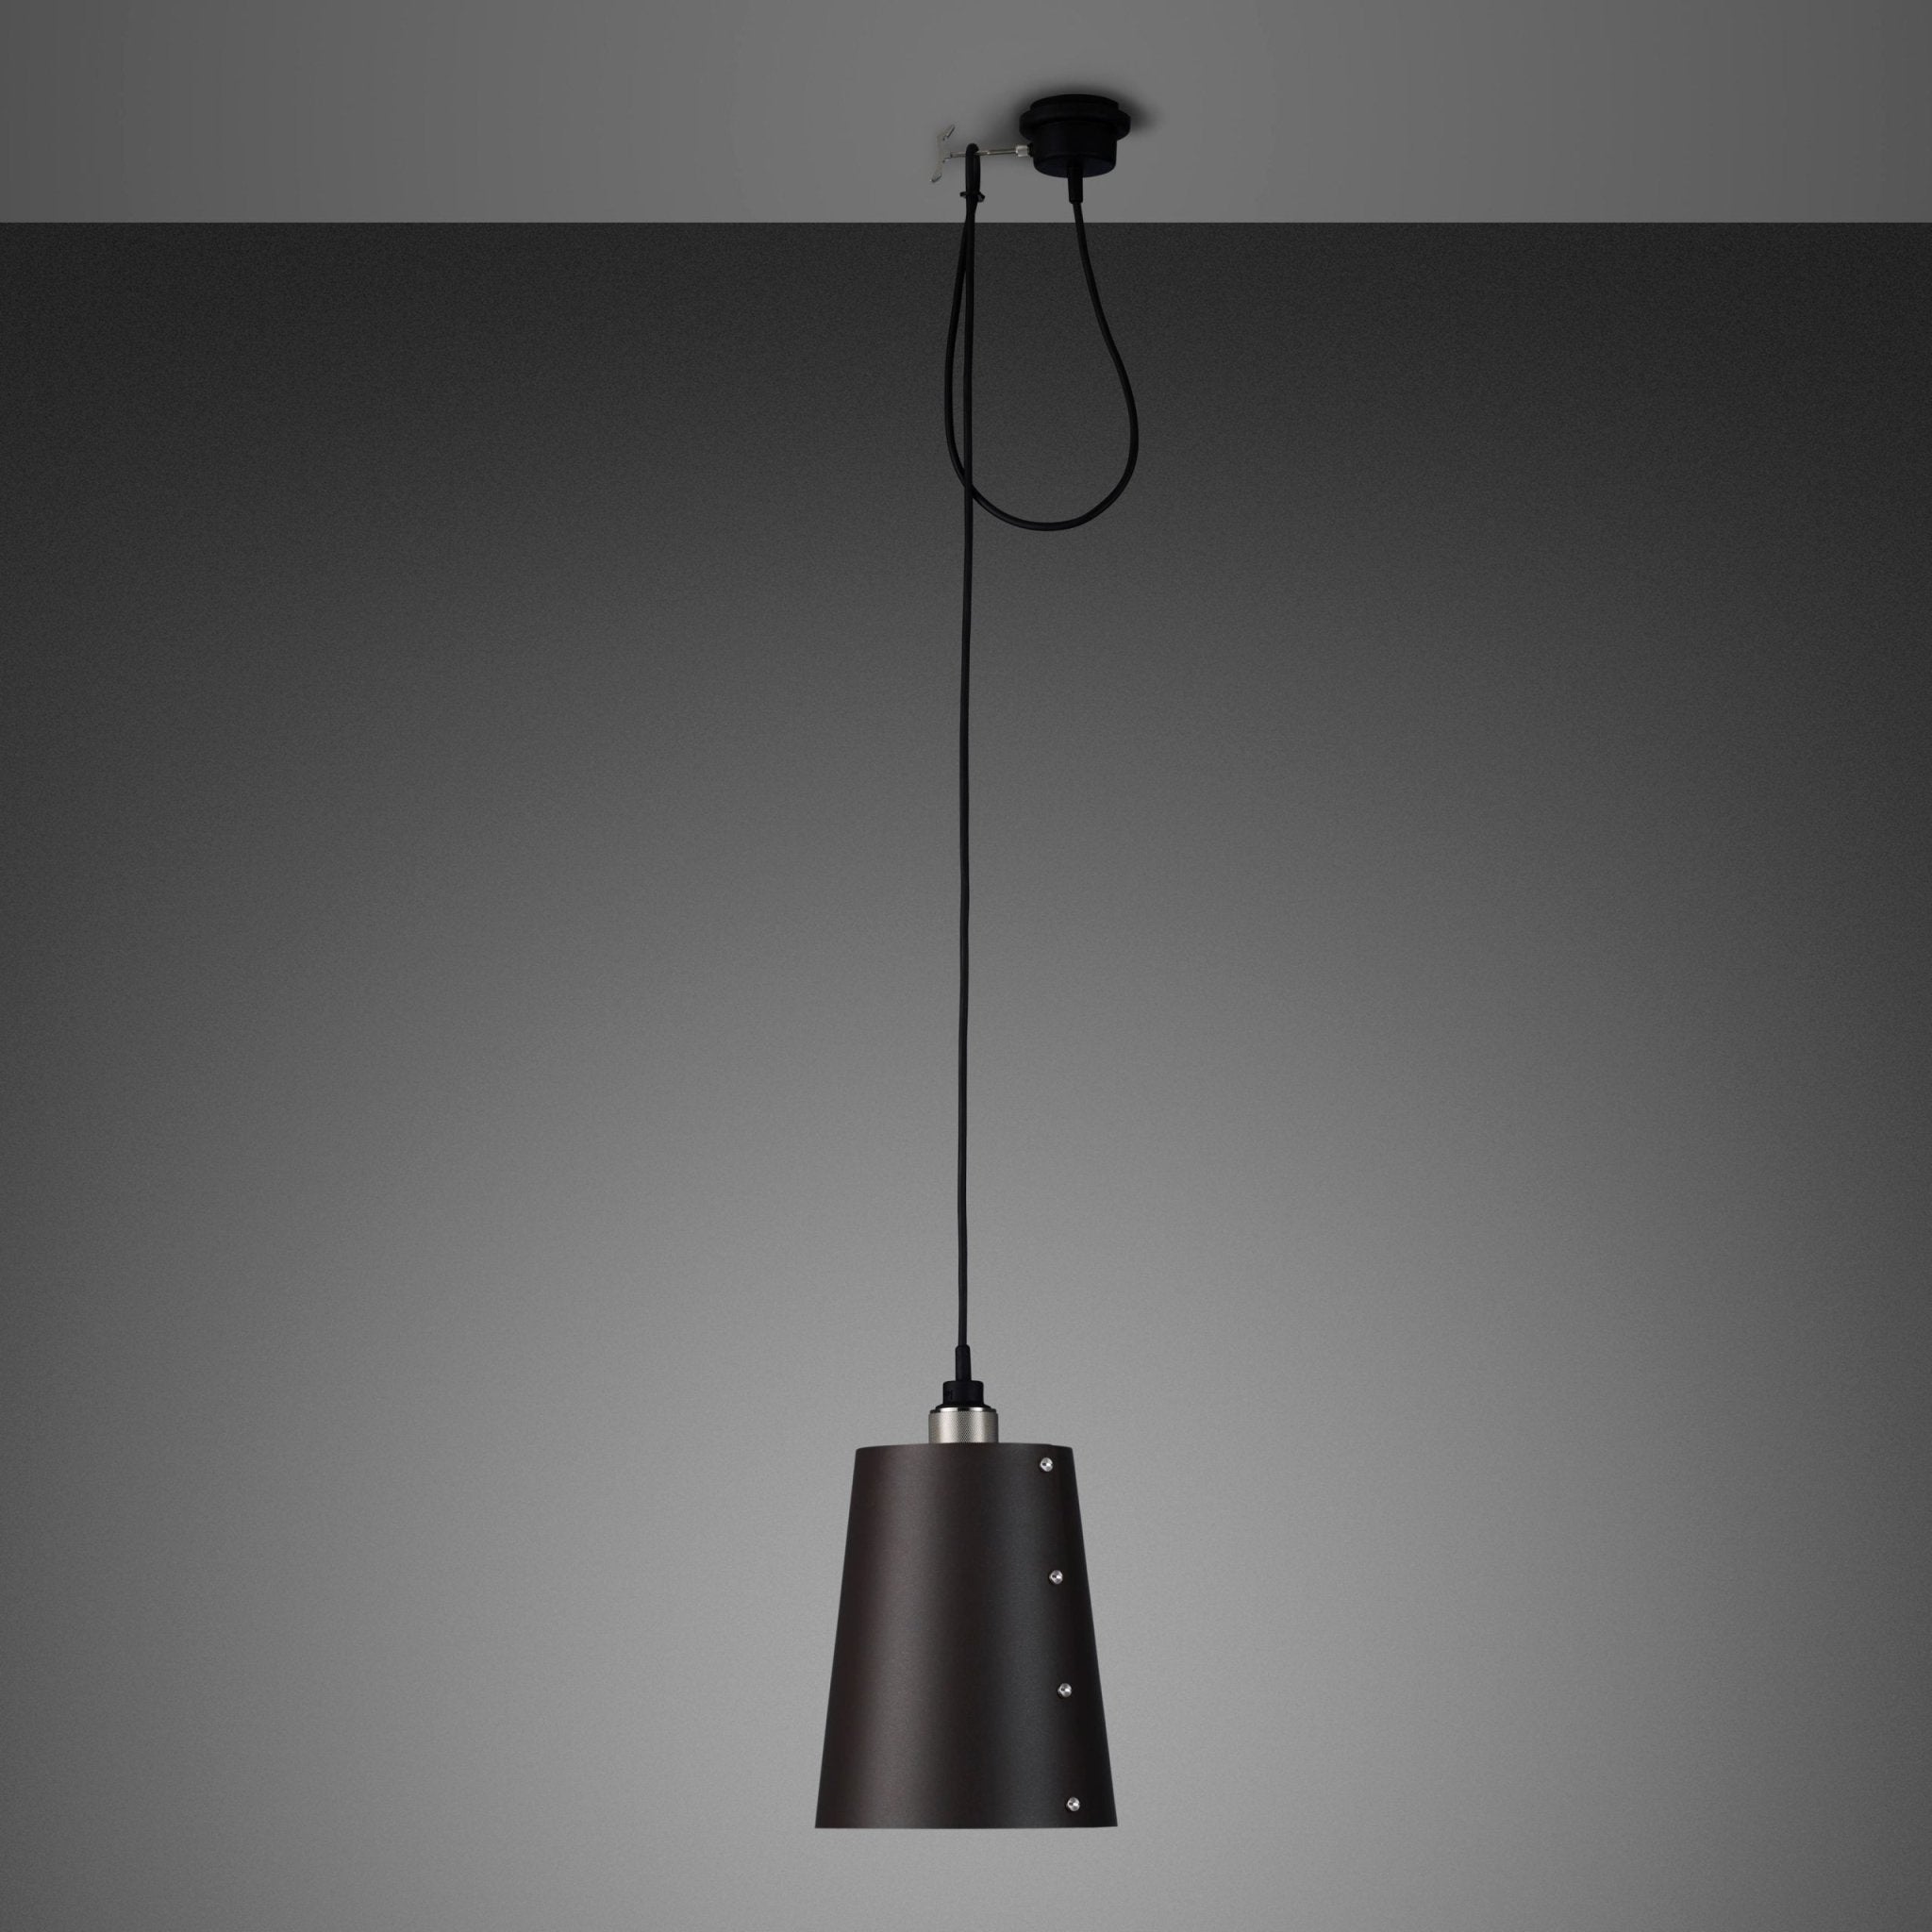 Buster and Punch - Hooked 1.0 / Groot Grafiet Shade 2.6m Hanglamp - KOOT